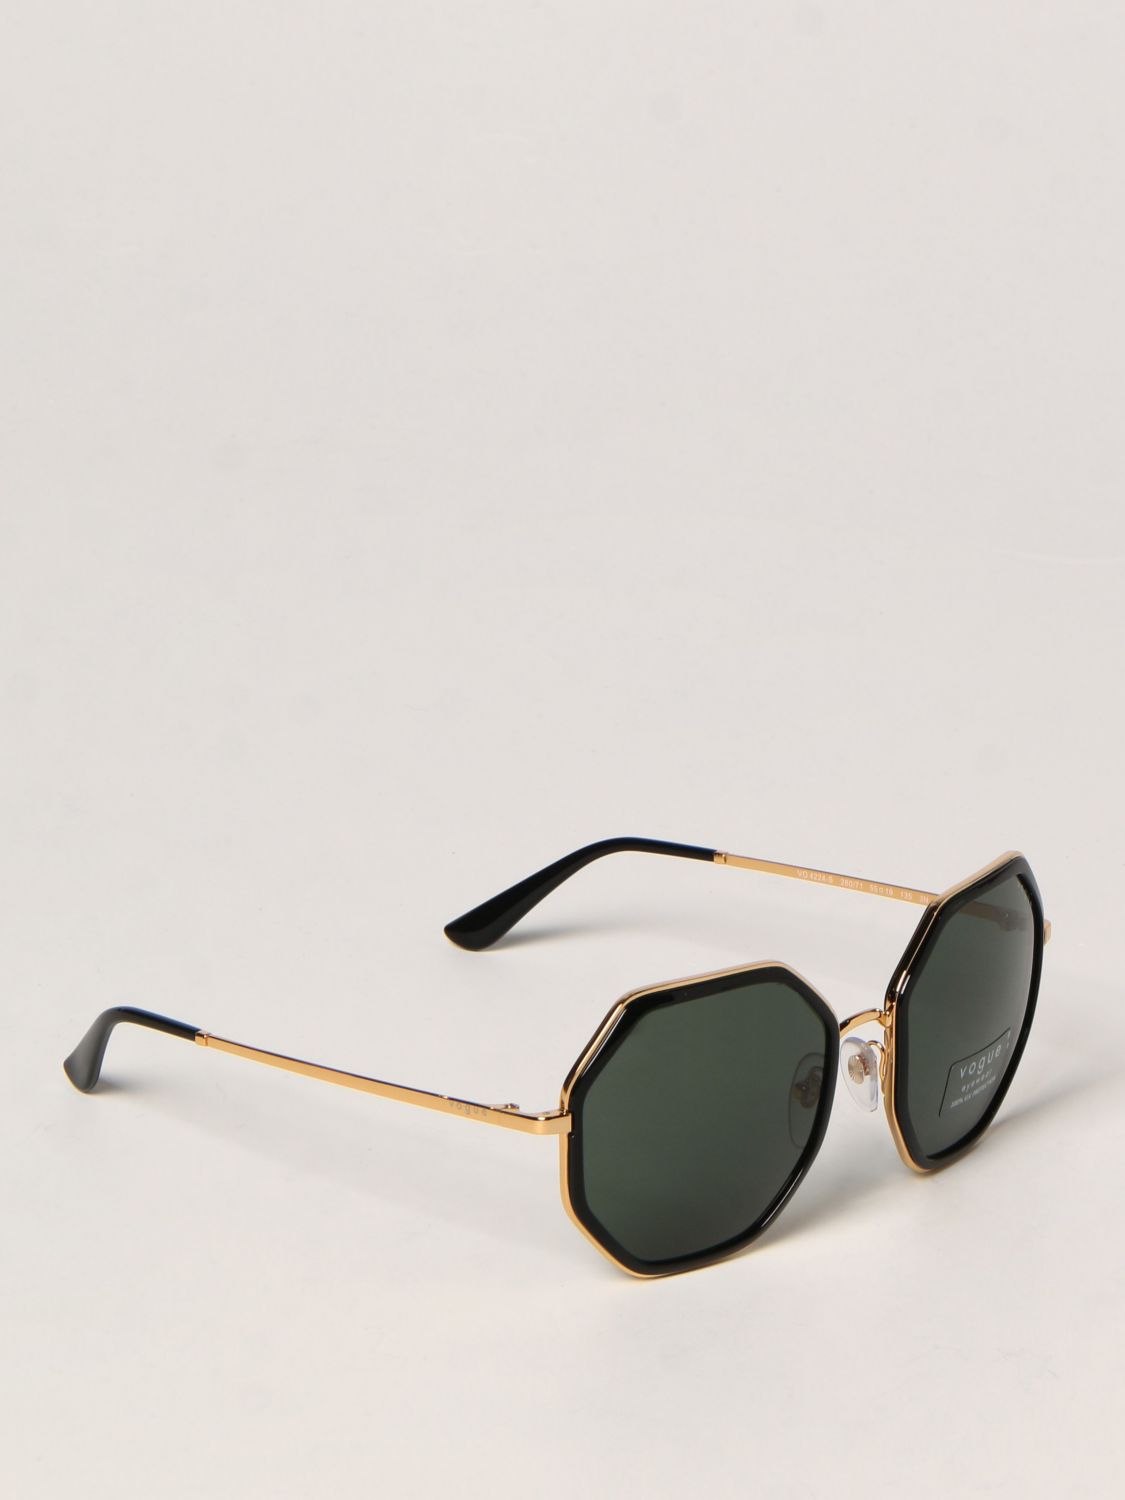 Vogue Vogue sunglasses in acetate and metal